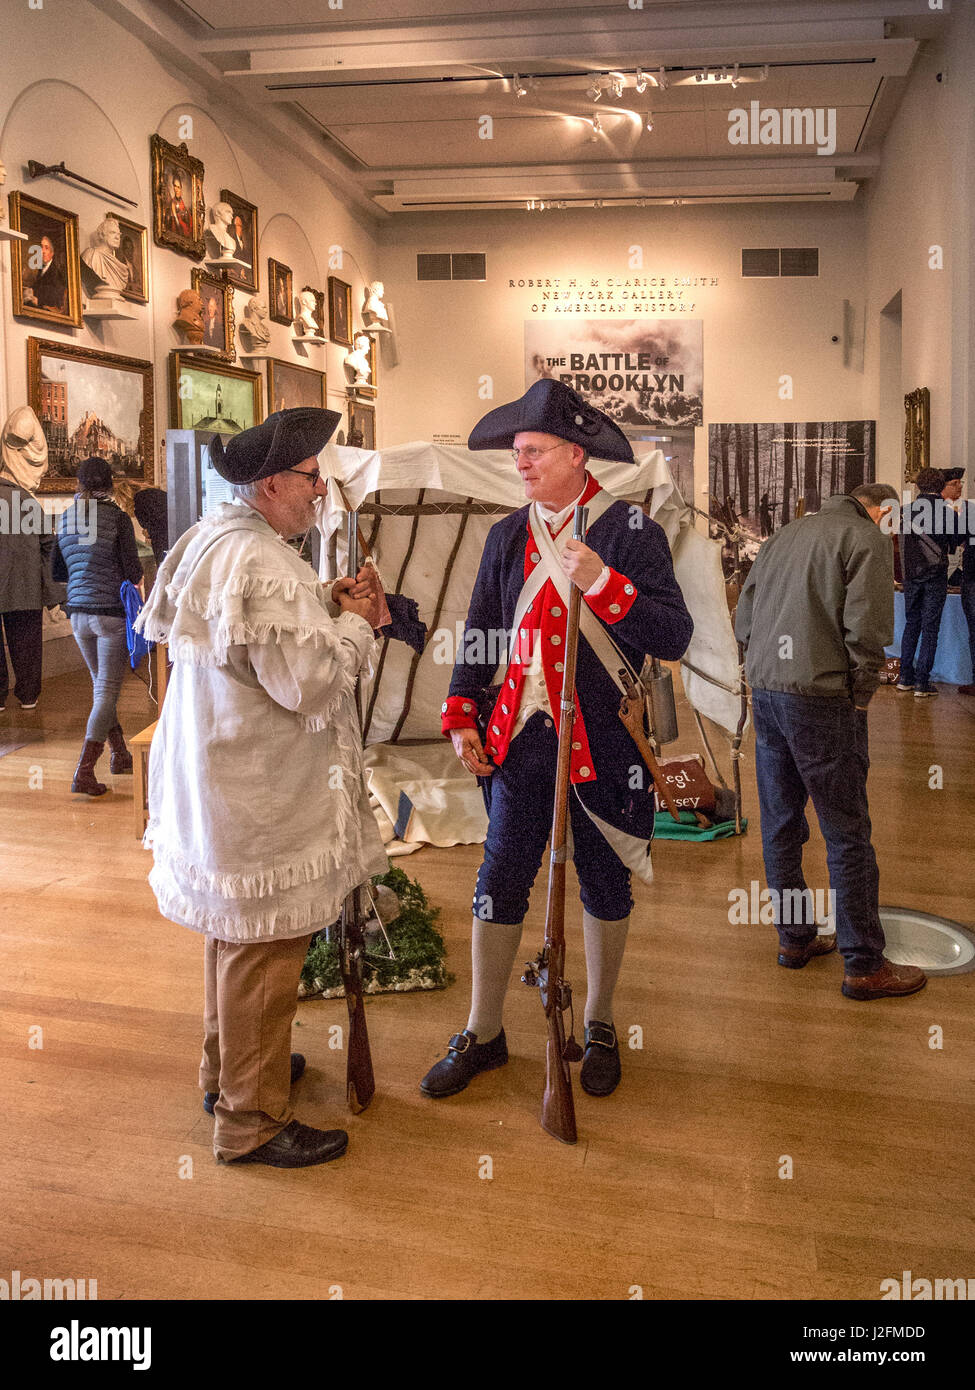 Wearing the uniforms of  Continental soldiers in the American Revolution, docents at the New-York Historical Society museum in New York City are prepared to explain an exhibit on the 1776 Battle of Brooklyn. Note sign and tent in background. Stock Photo